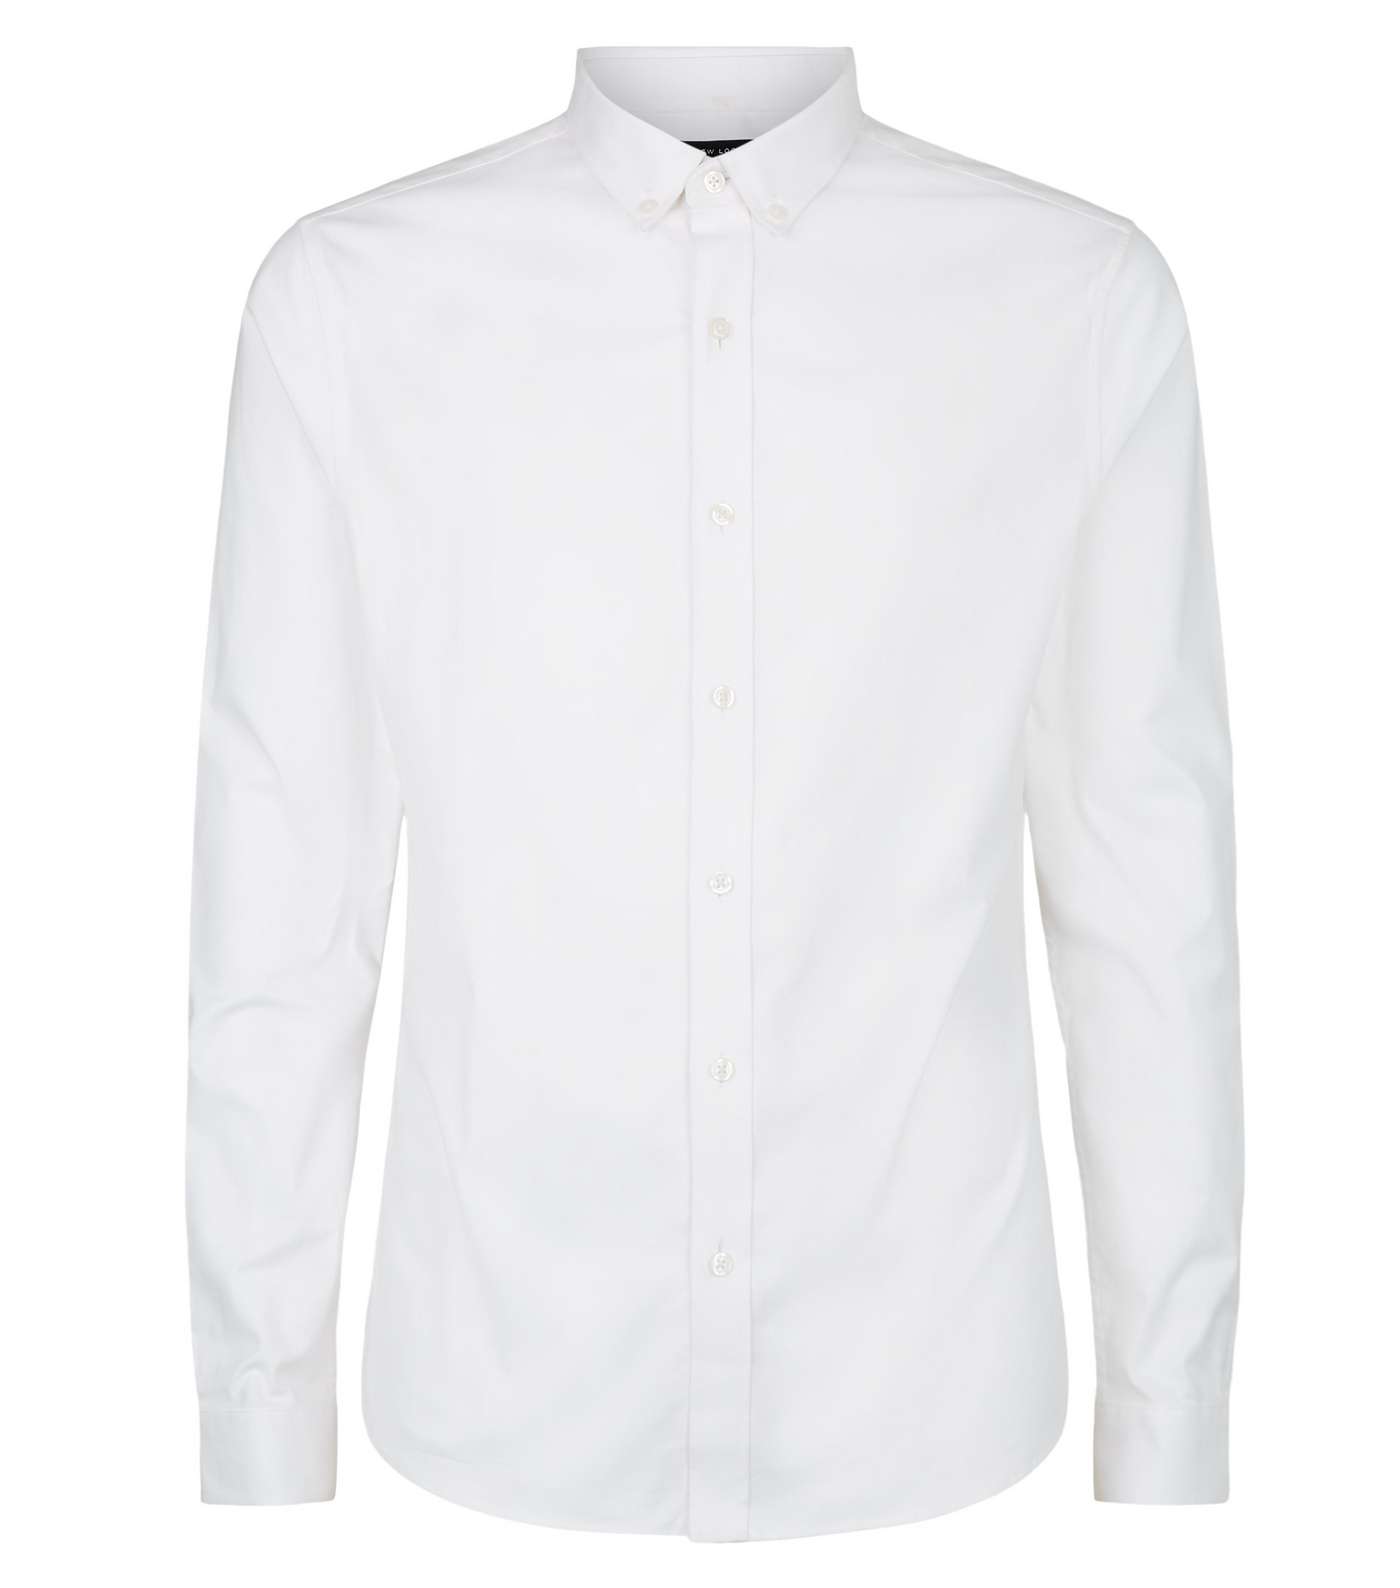 White Long Sleeve Muscle Fit Oxford Shirt Image 4